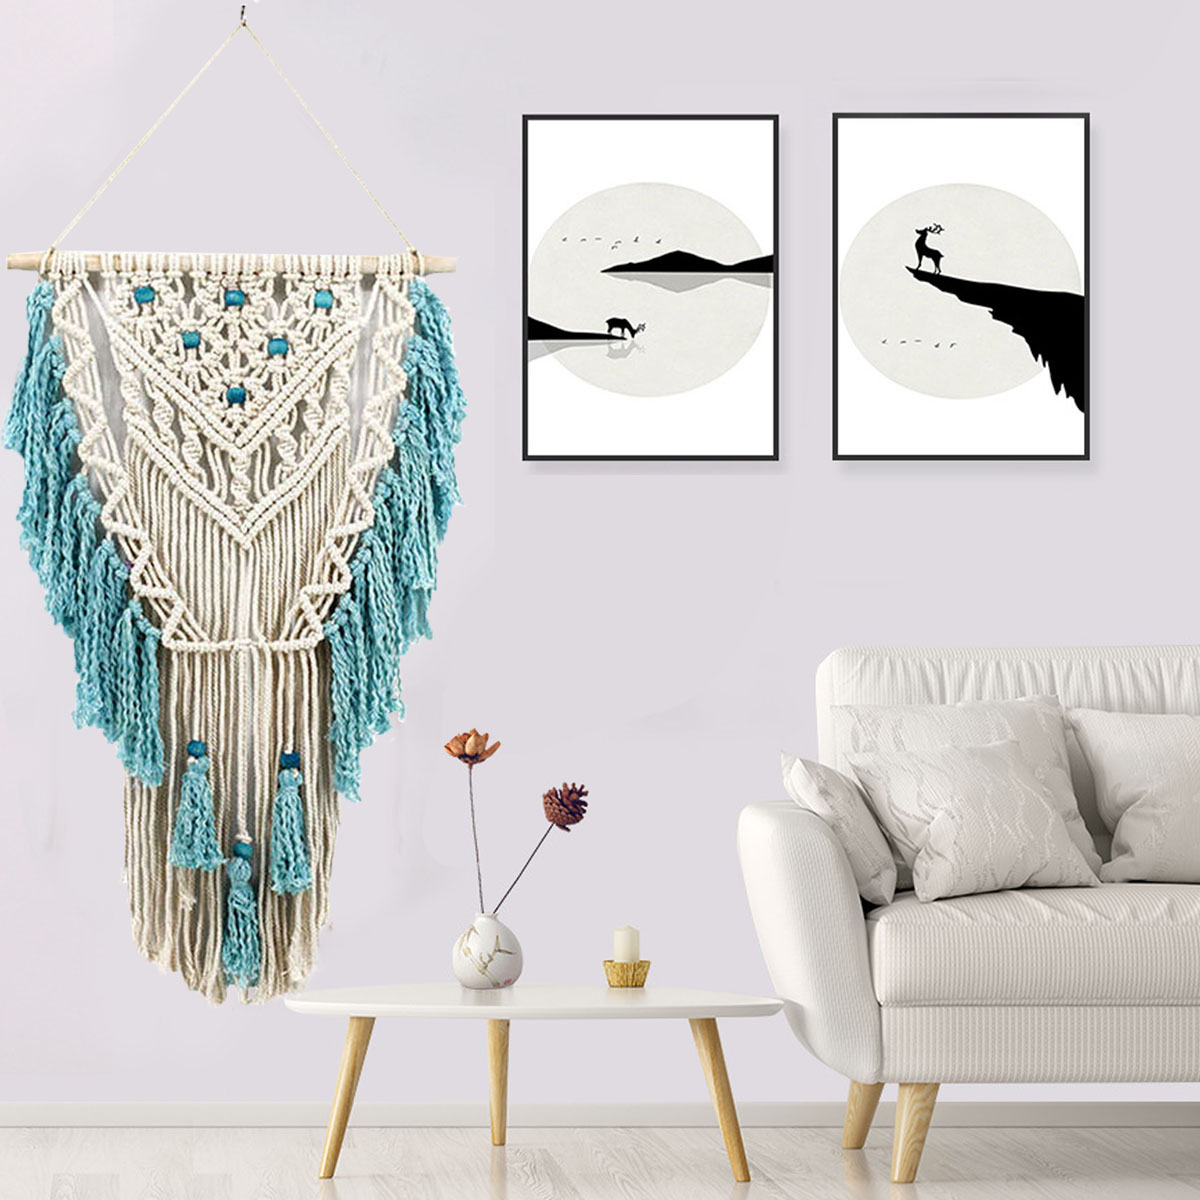 Hand-Knotted-Macrame-Wall-Art-Handmade-Bohemian-Hanging-Tapestry-Room-Decorations-1637667-3